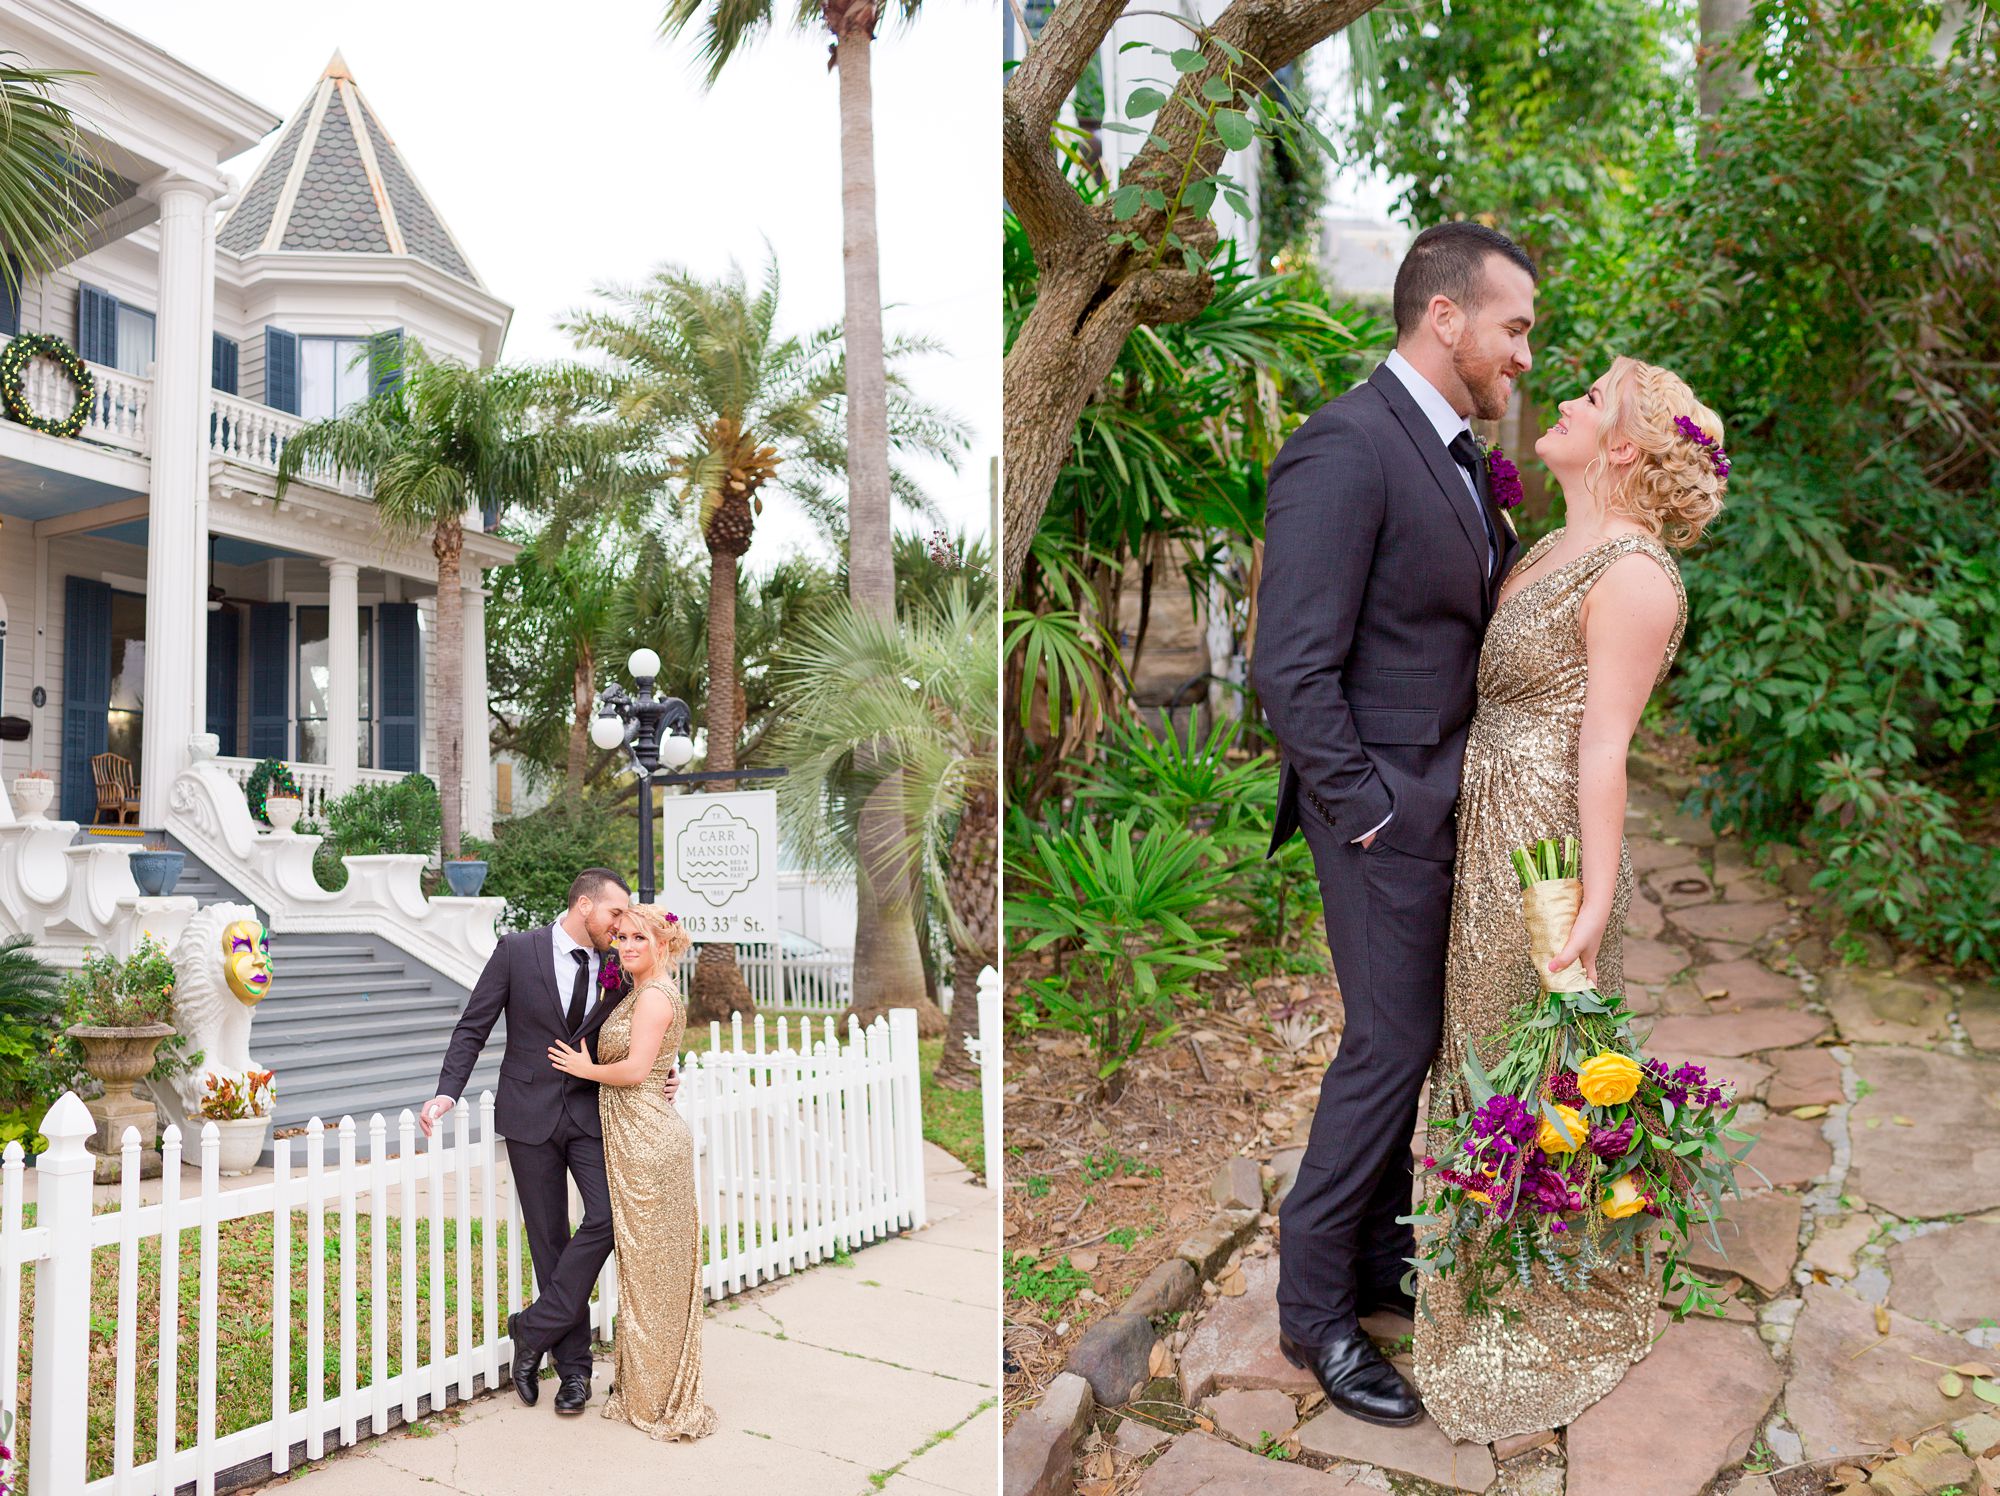 Bride and groom in front of Carr Mansion; Bride and groom in Carr Mansion garden.